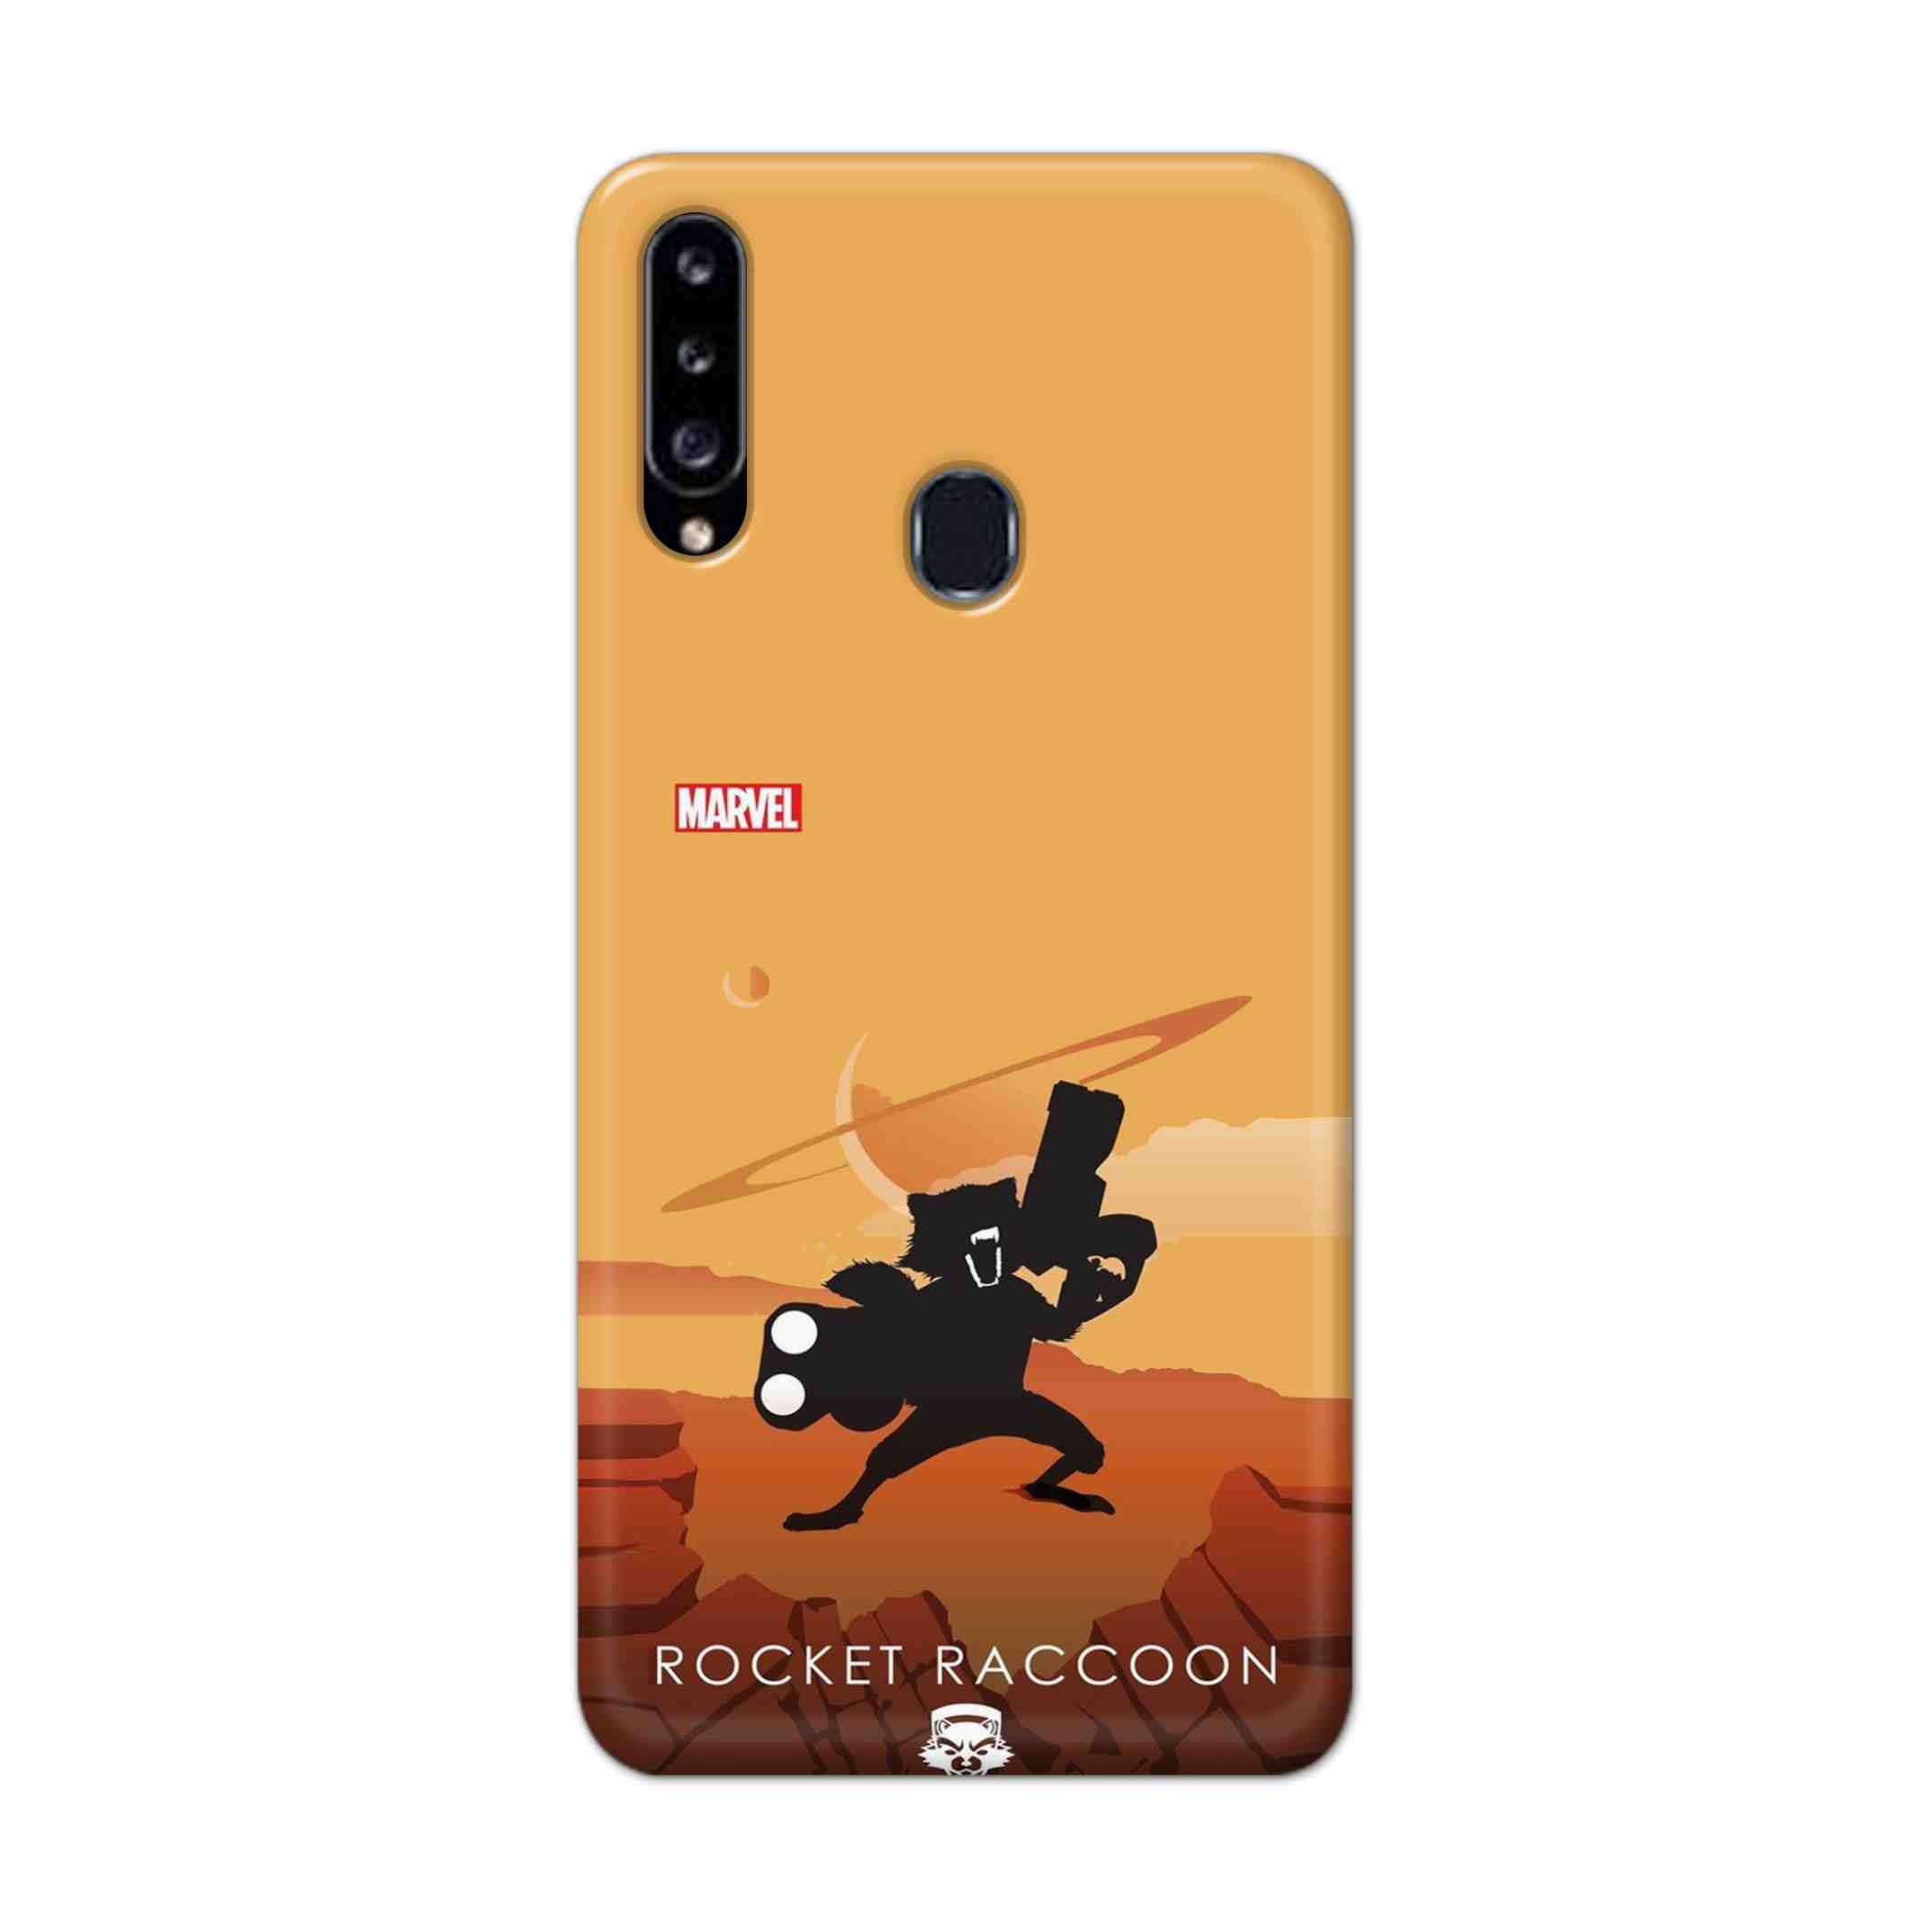 Buy Rocket Raccoon Hard Back Mobile Phone Case Cover For Samsung Galaxy A21 Online